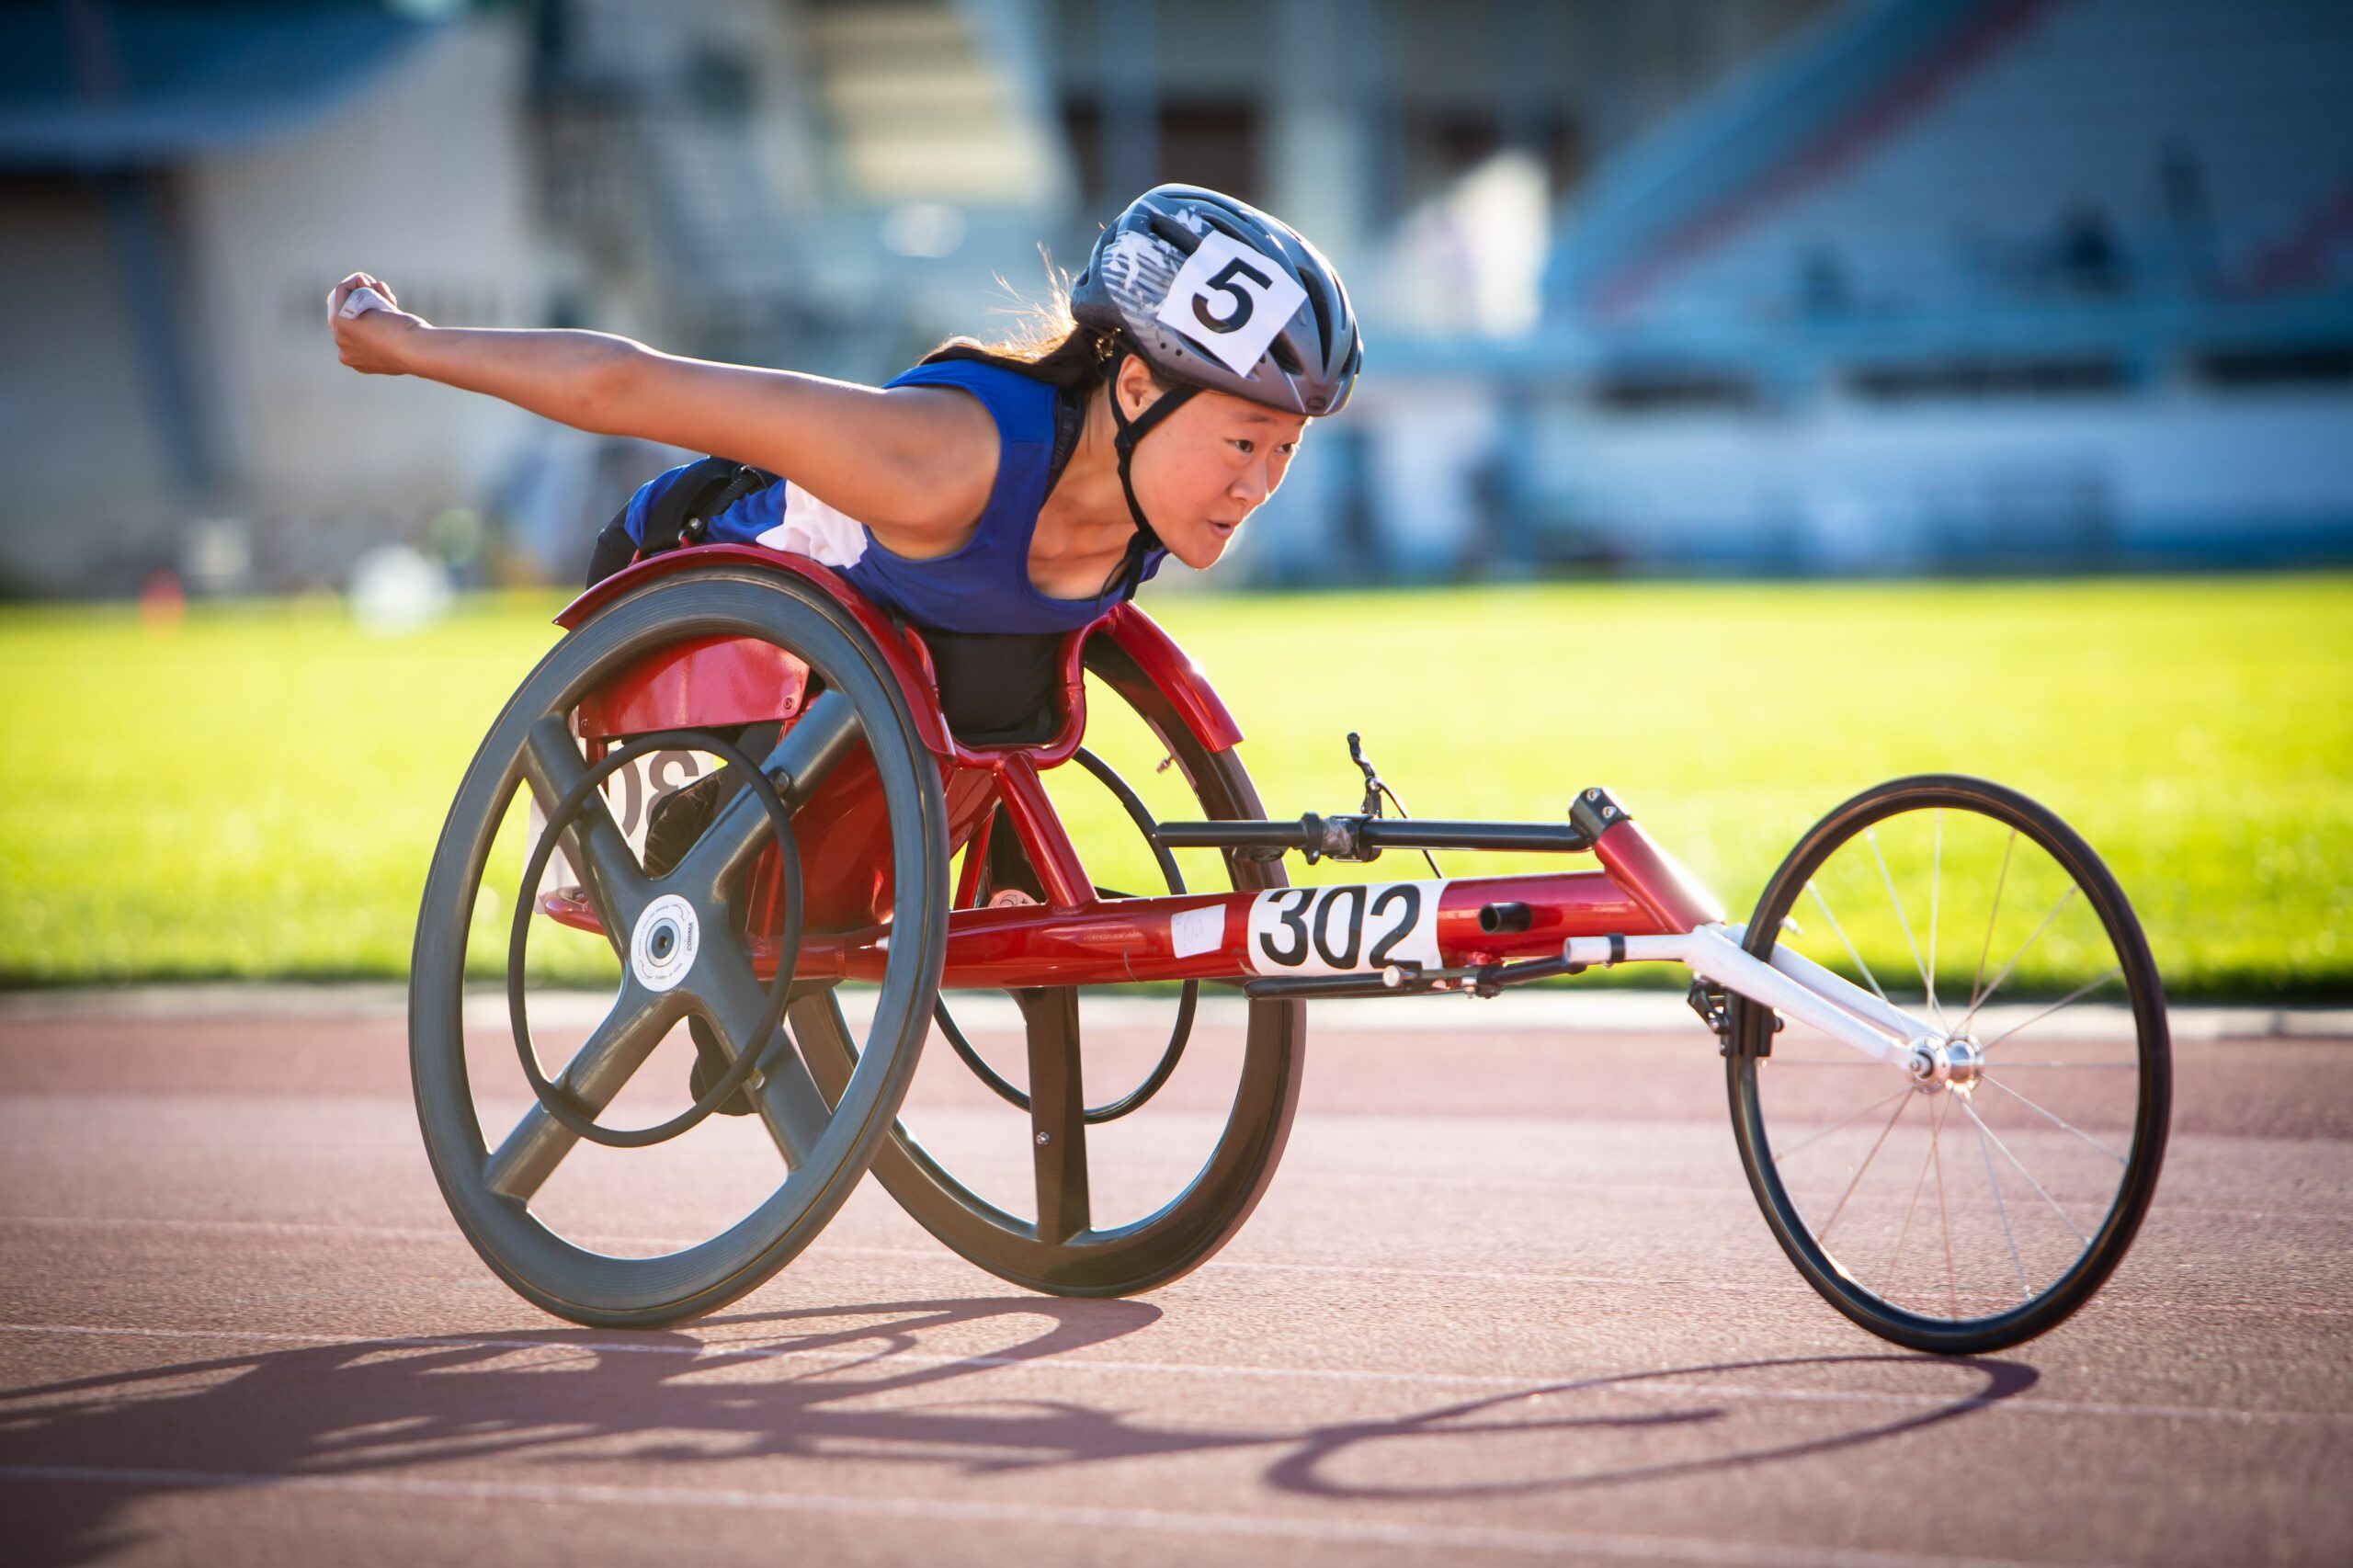 Young wheelchair racer on the track